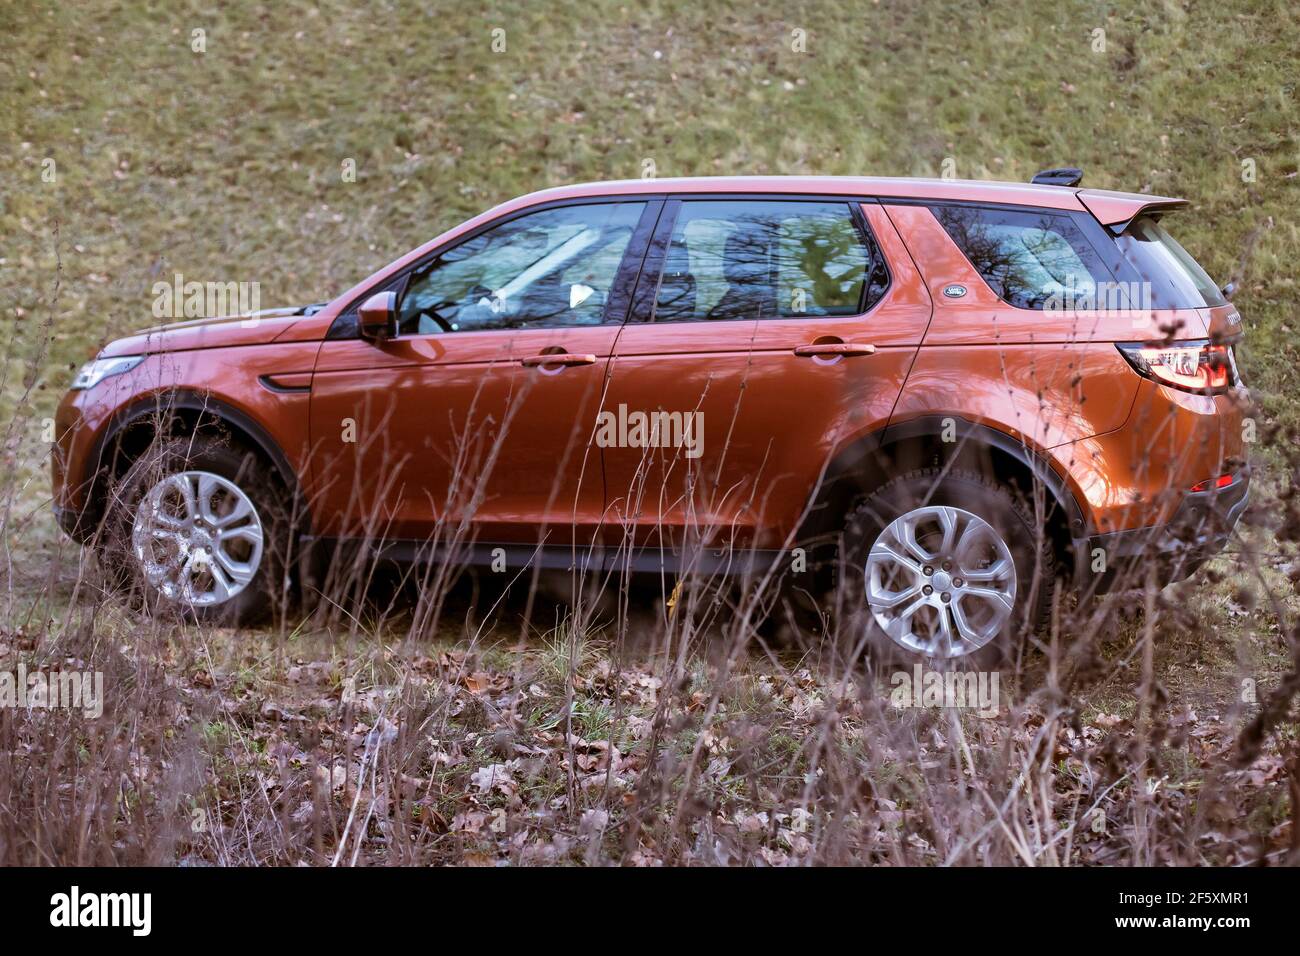 Moscow, Russia - December 20, 2019: side View of all new premium england suv. Land rover Discovery sport parked in the forest. Orange all wheel drive car standed on the ground. Stock Photo